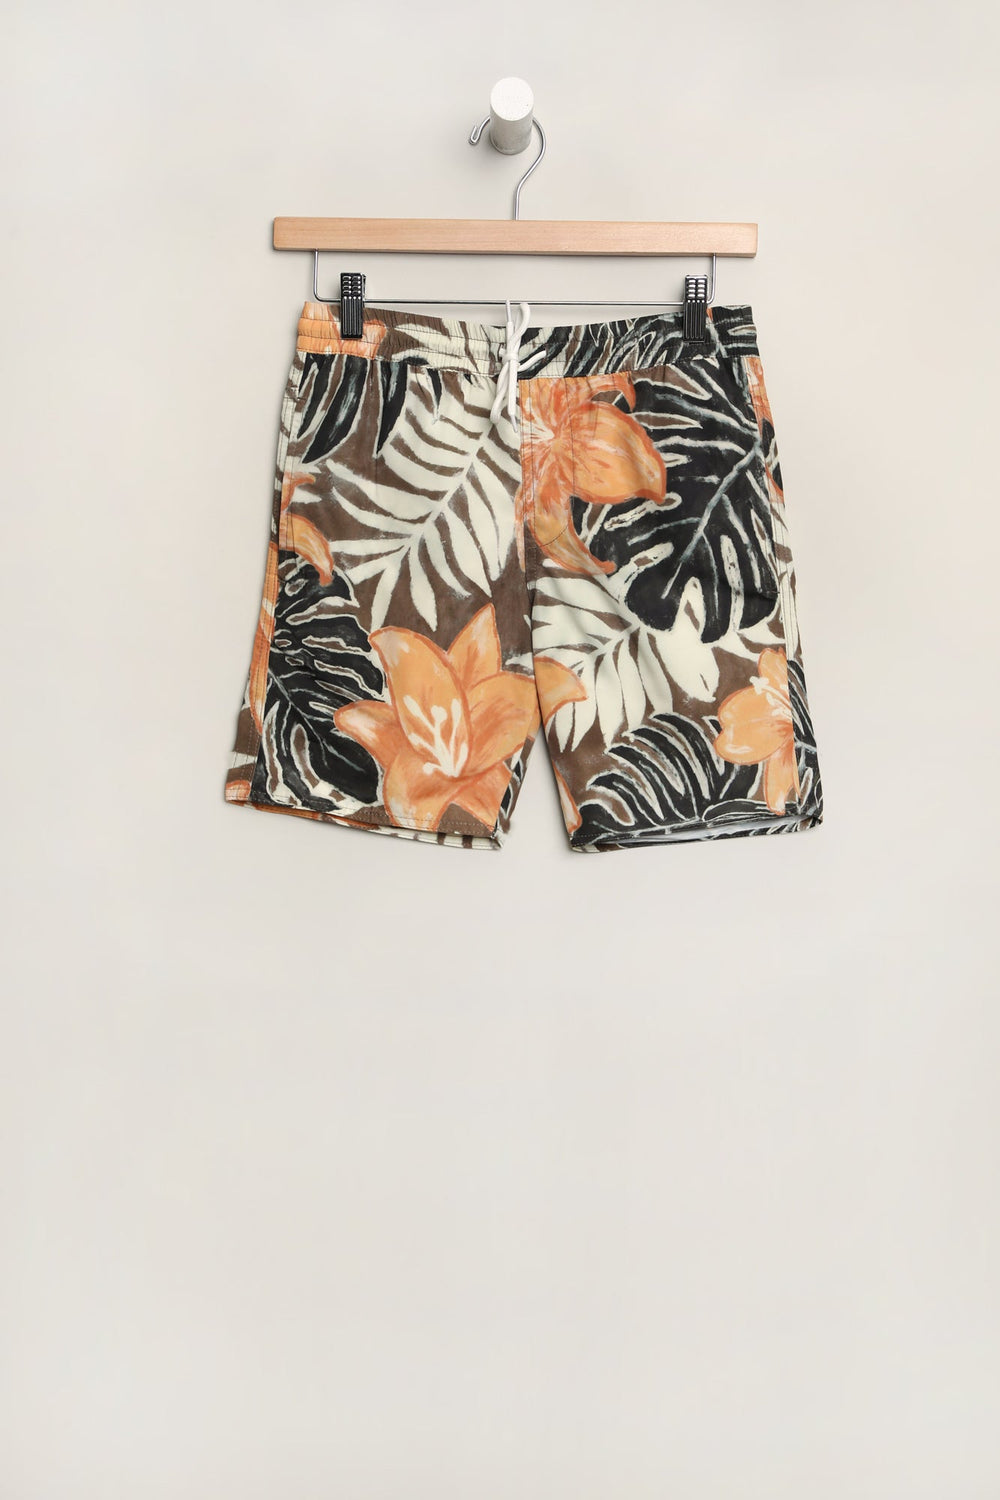 West49 Youth Tropical Print Beach Shorts West49 Youth Tropical Print Beach Shorts